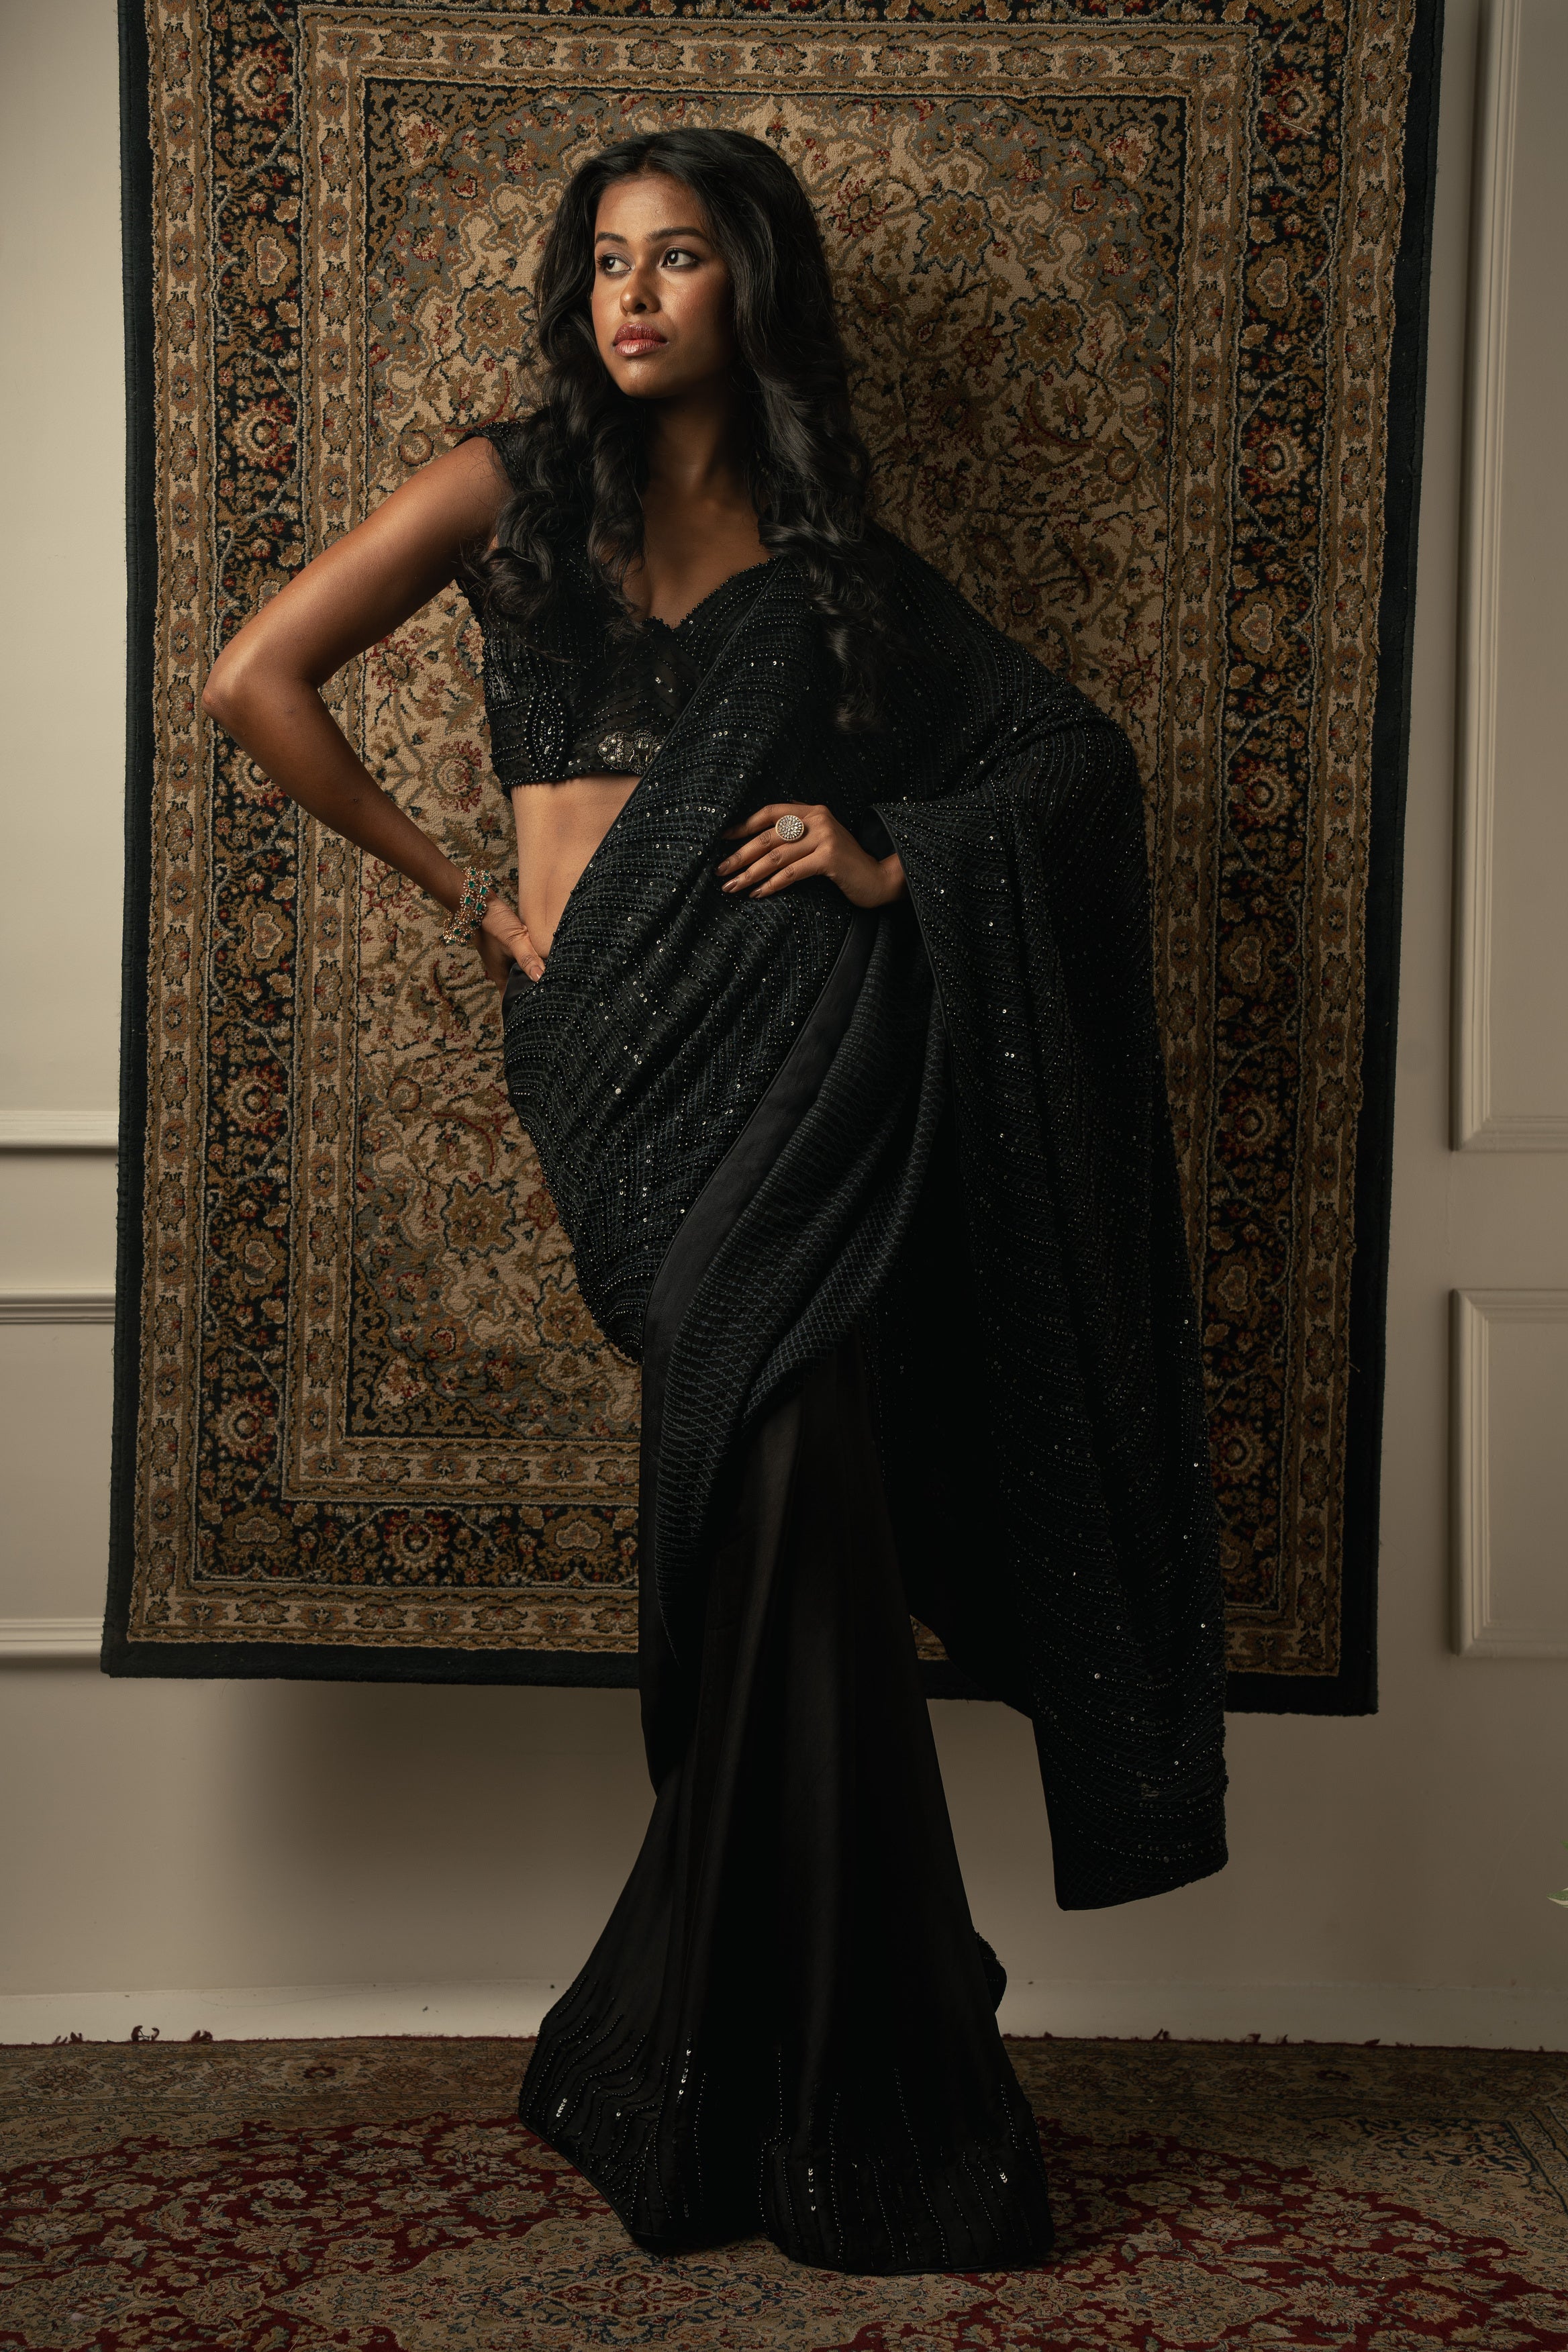 Draped in elegance: Silk satin and georgette saree paired with a shimmer organza blouse. Black never looked so chic.